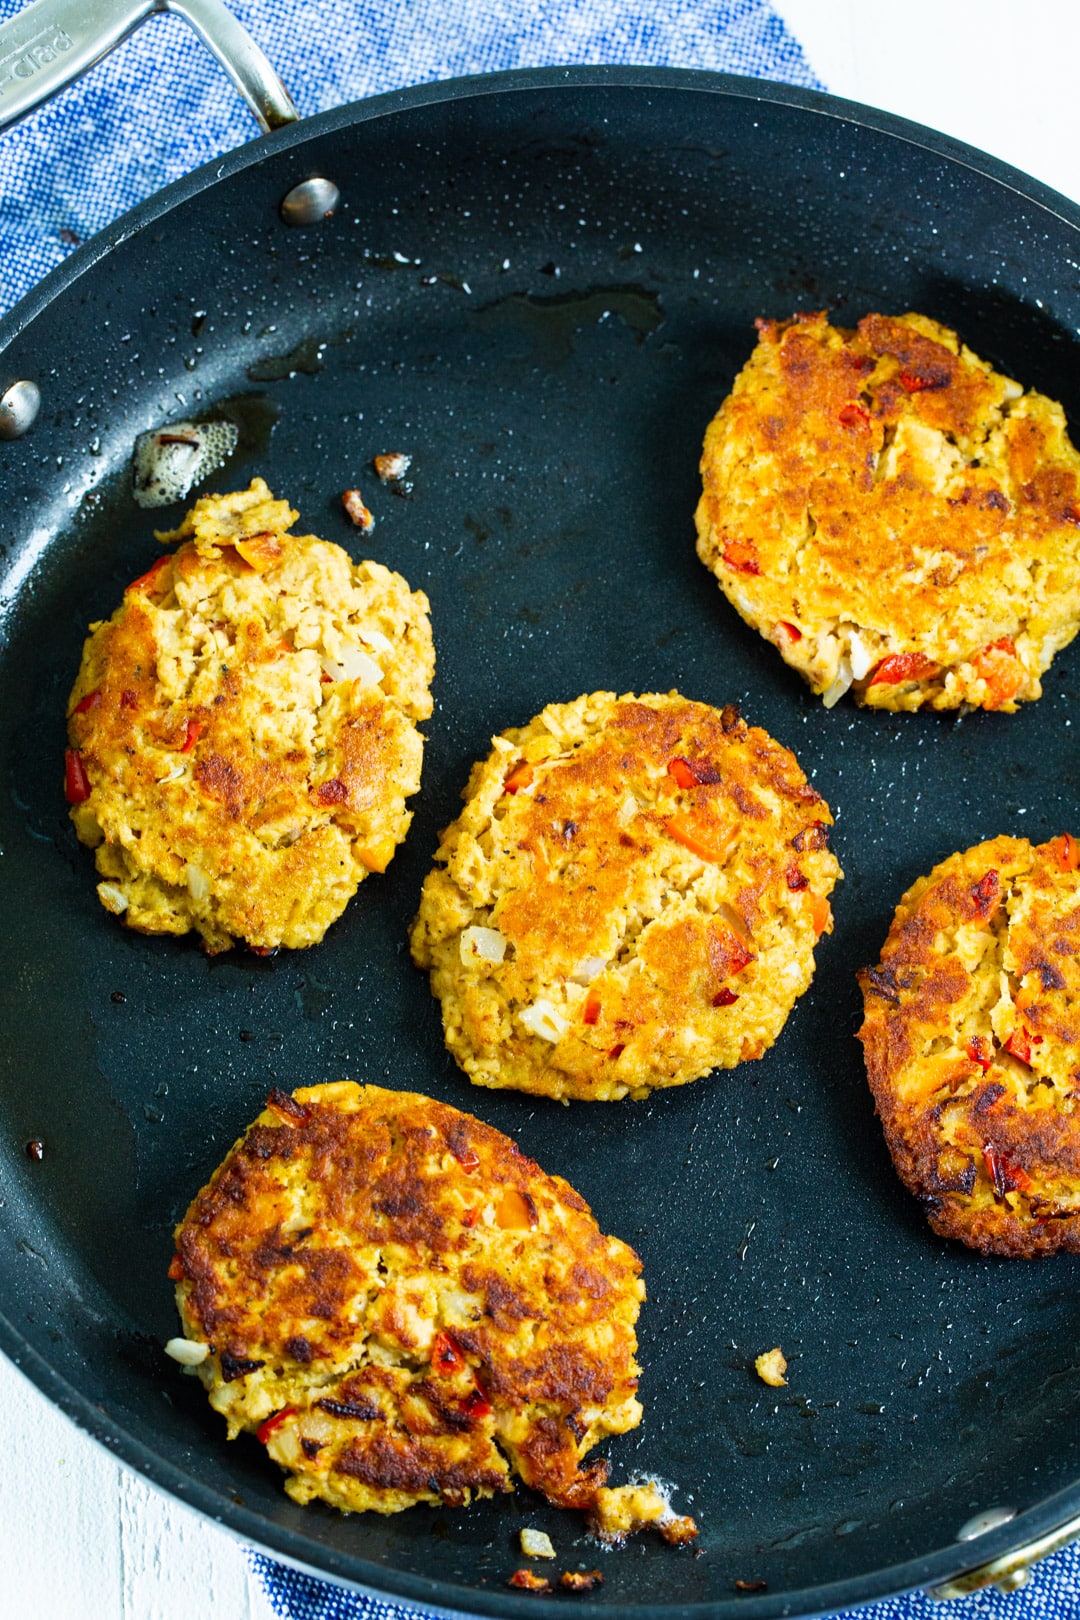 Salmon cakes in a skillet.